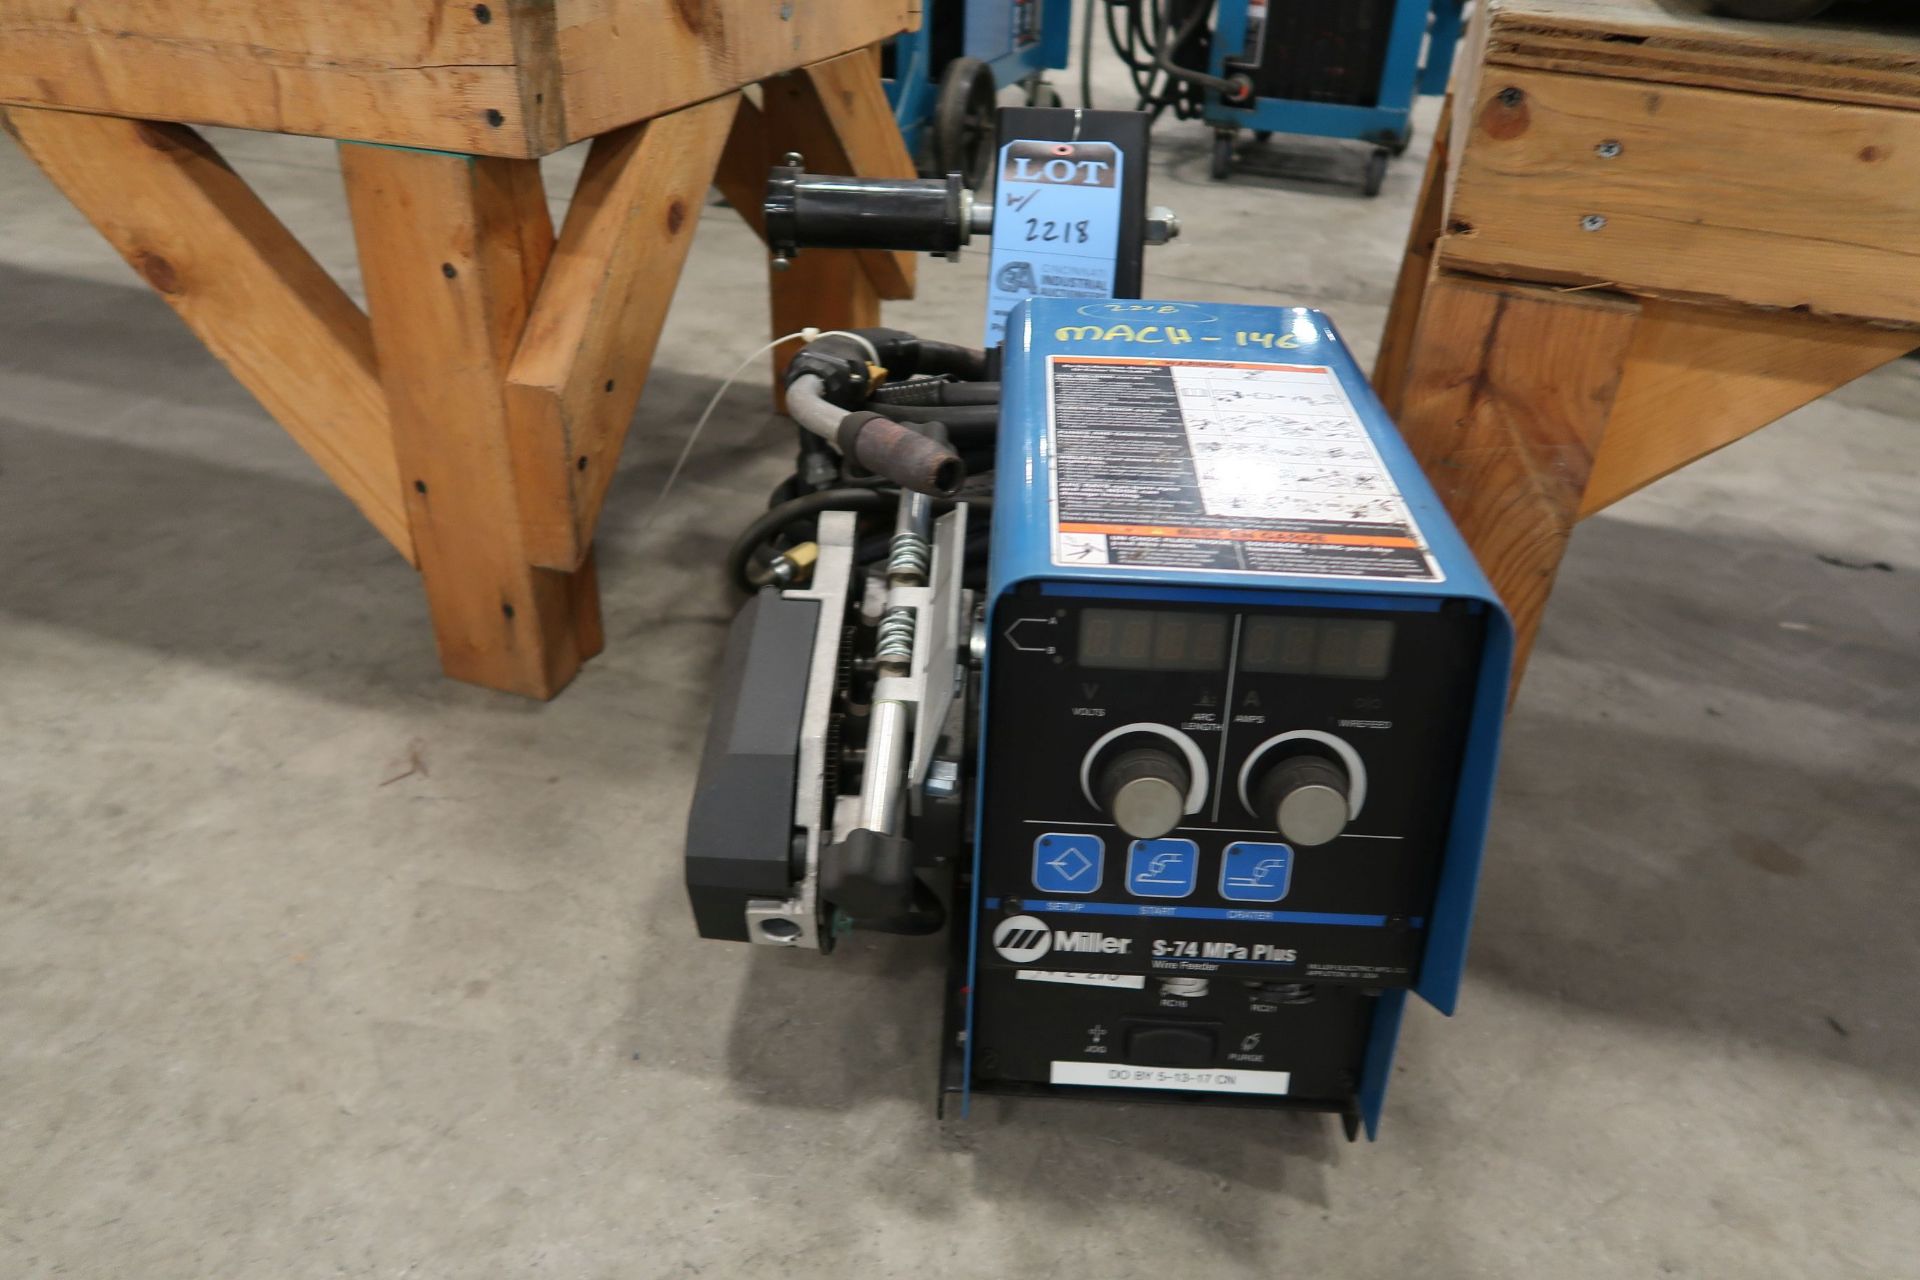 350 AMP MILLER INVISION 352 MPA WELDER WITH MILLER S-74 MPA PLUS WIRE FEEDER; FA 70063-08 - Image 3 of 4